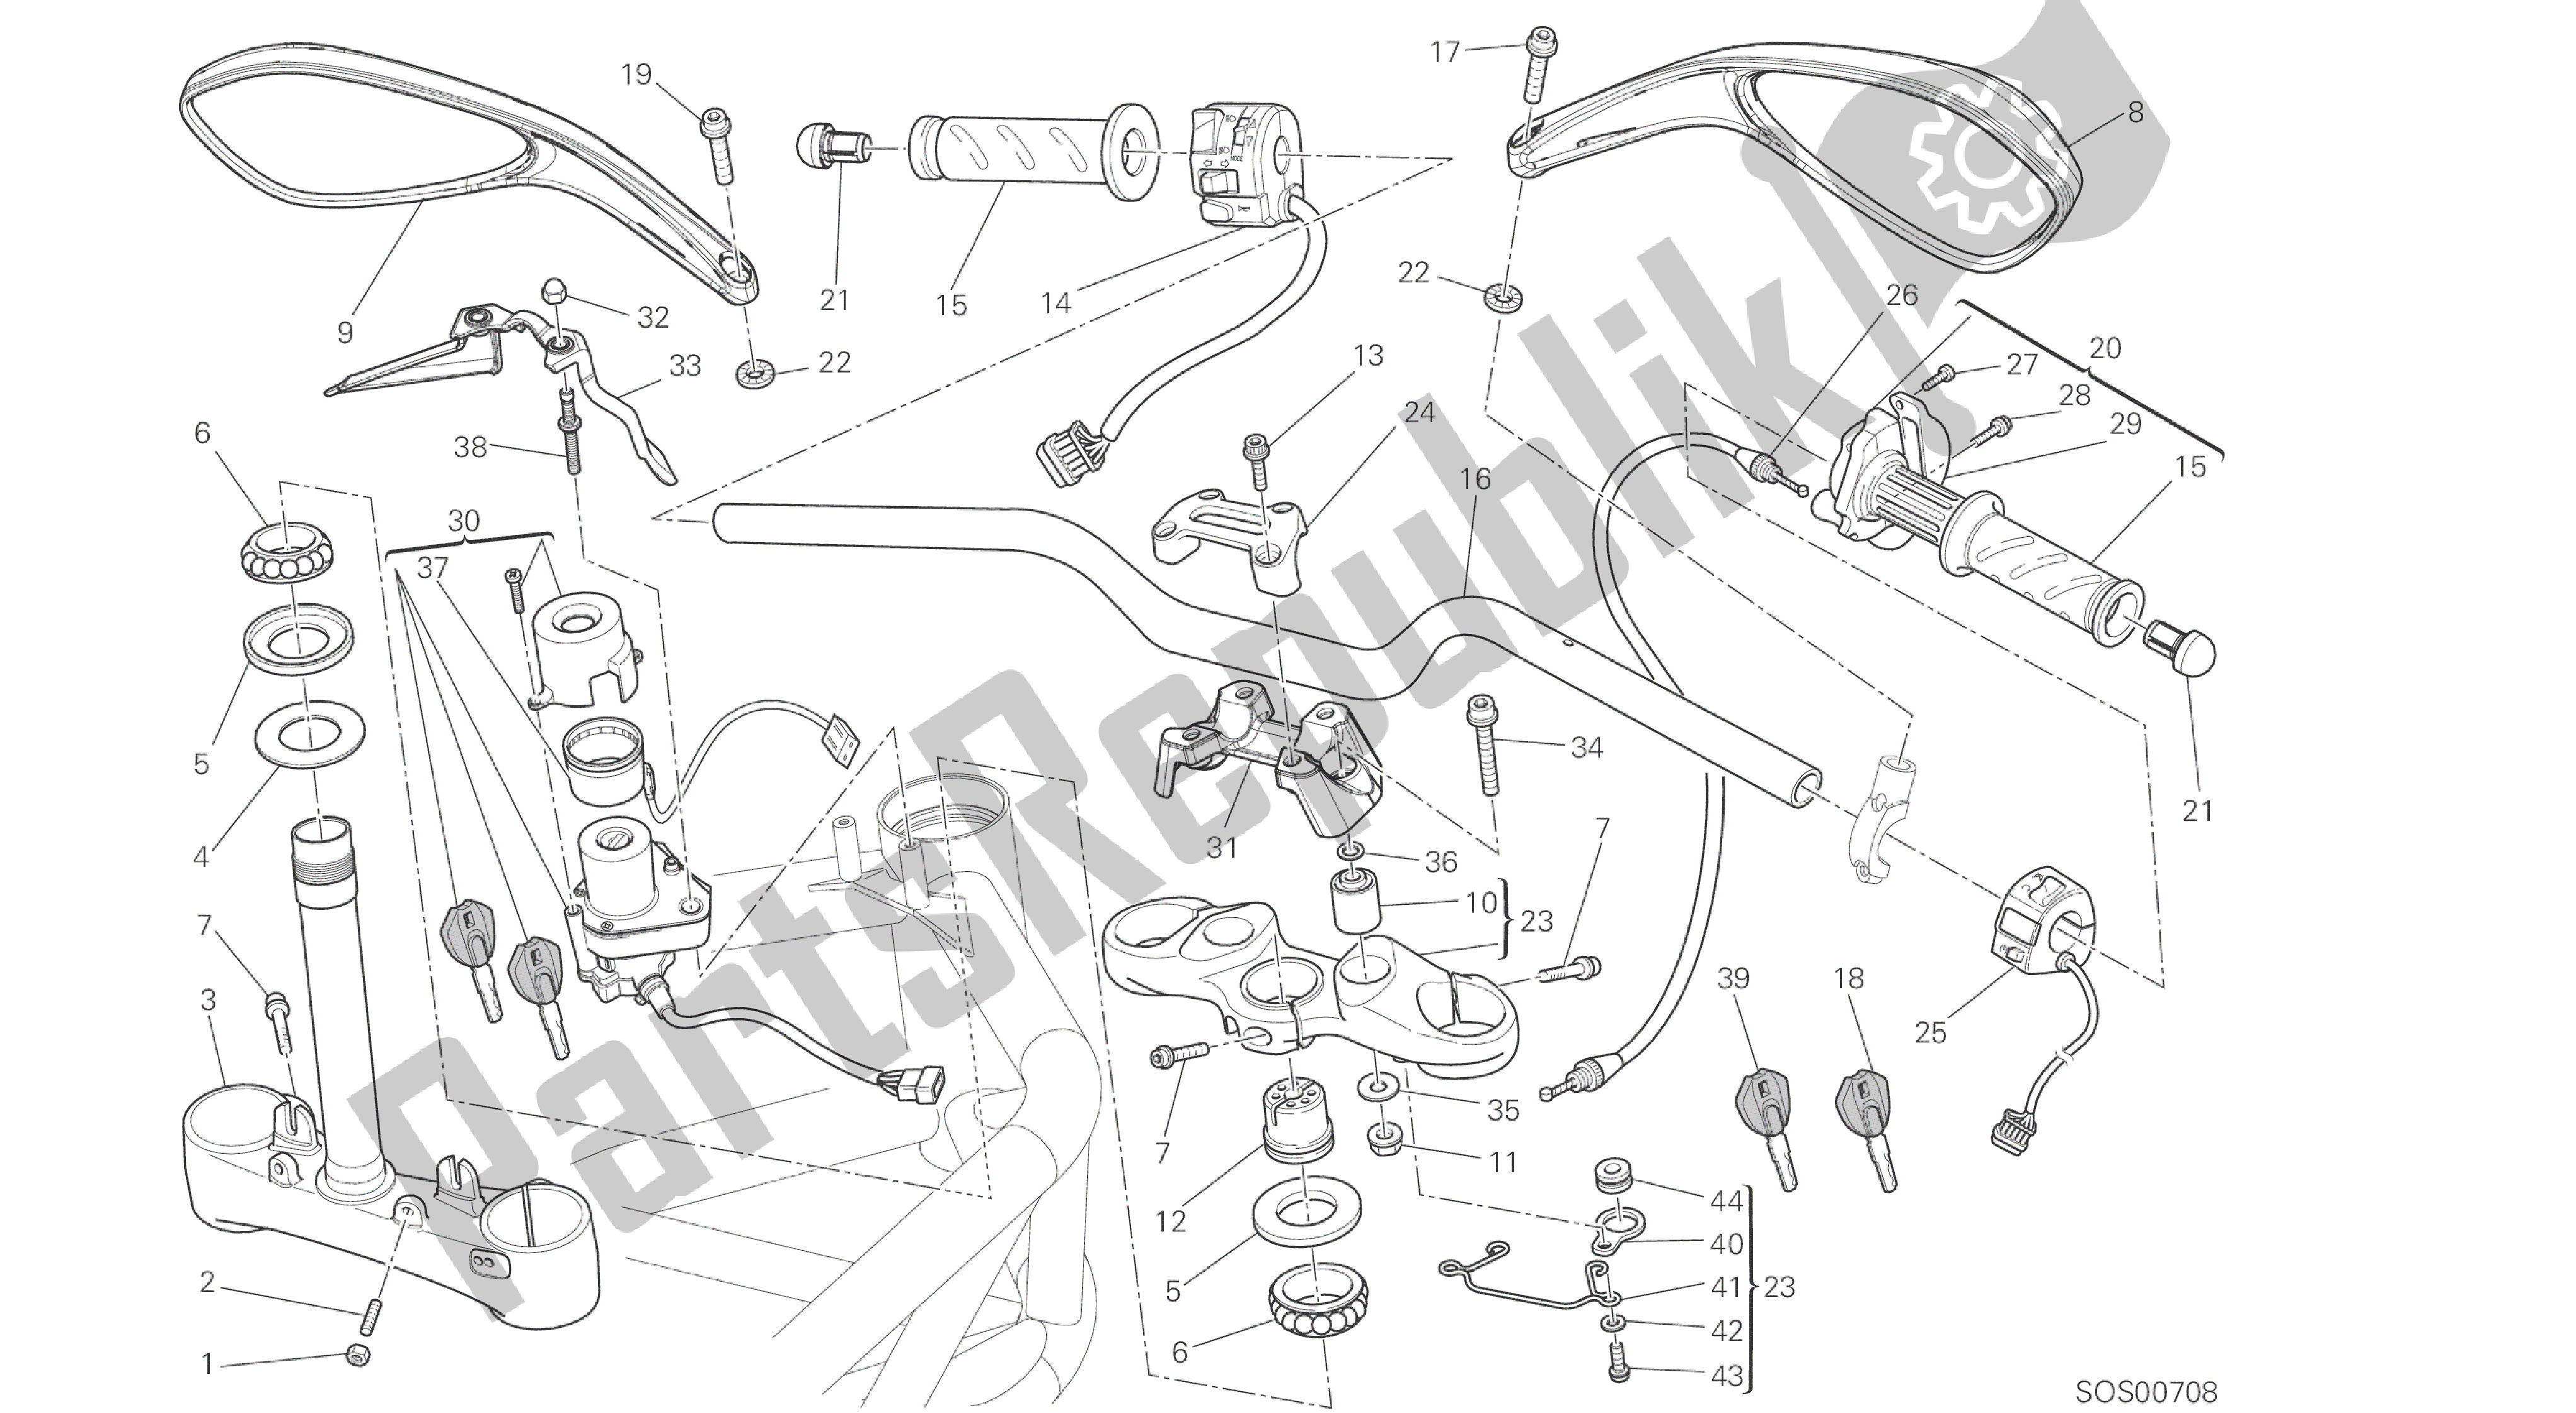 All parts for the Drawing 026 - Handlebar [mod:m796 Abs;xst:aus,bra,eur,jap,twn]group Frame of the Ducati Monster ABS 796 2014